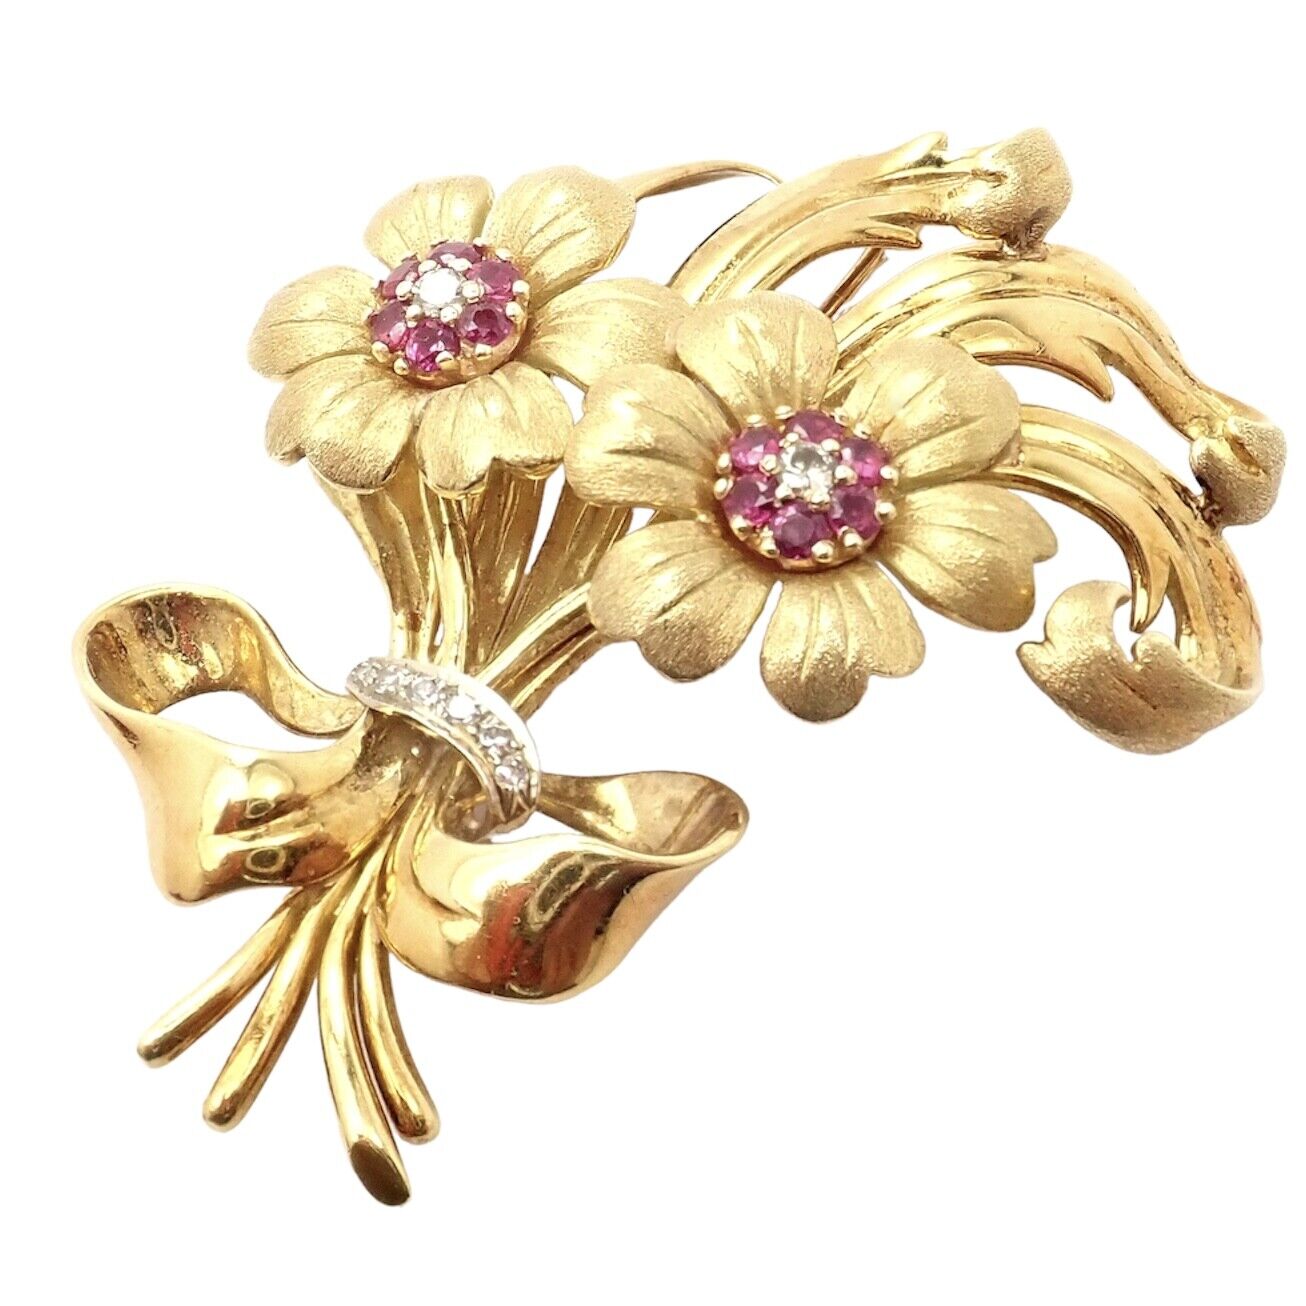 Authentic Vintage Cartier 18k Yellow Gold Ruby Diamond Flower